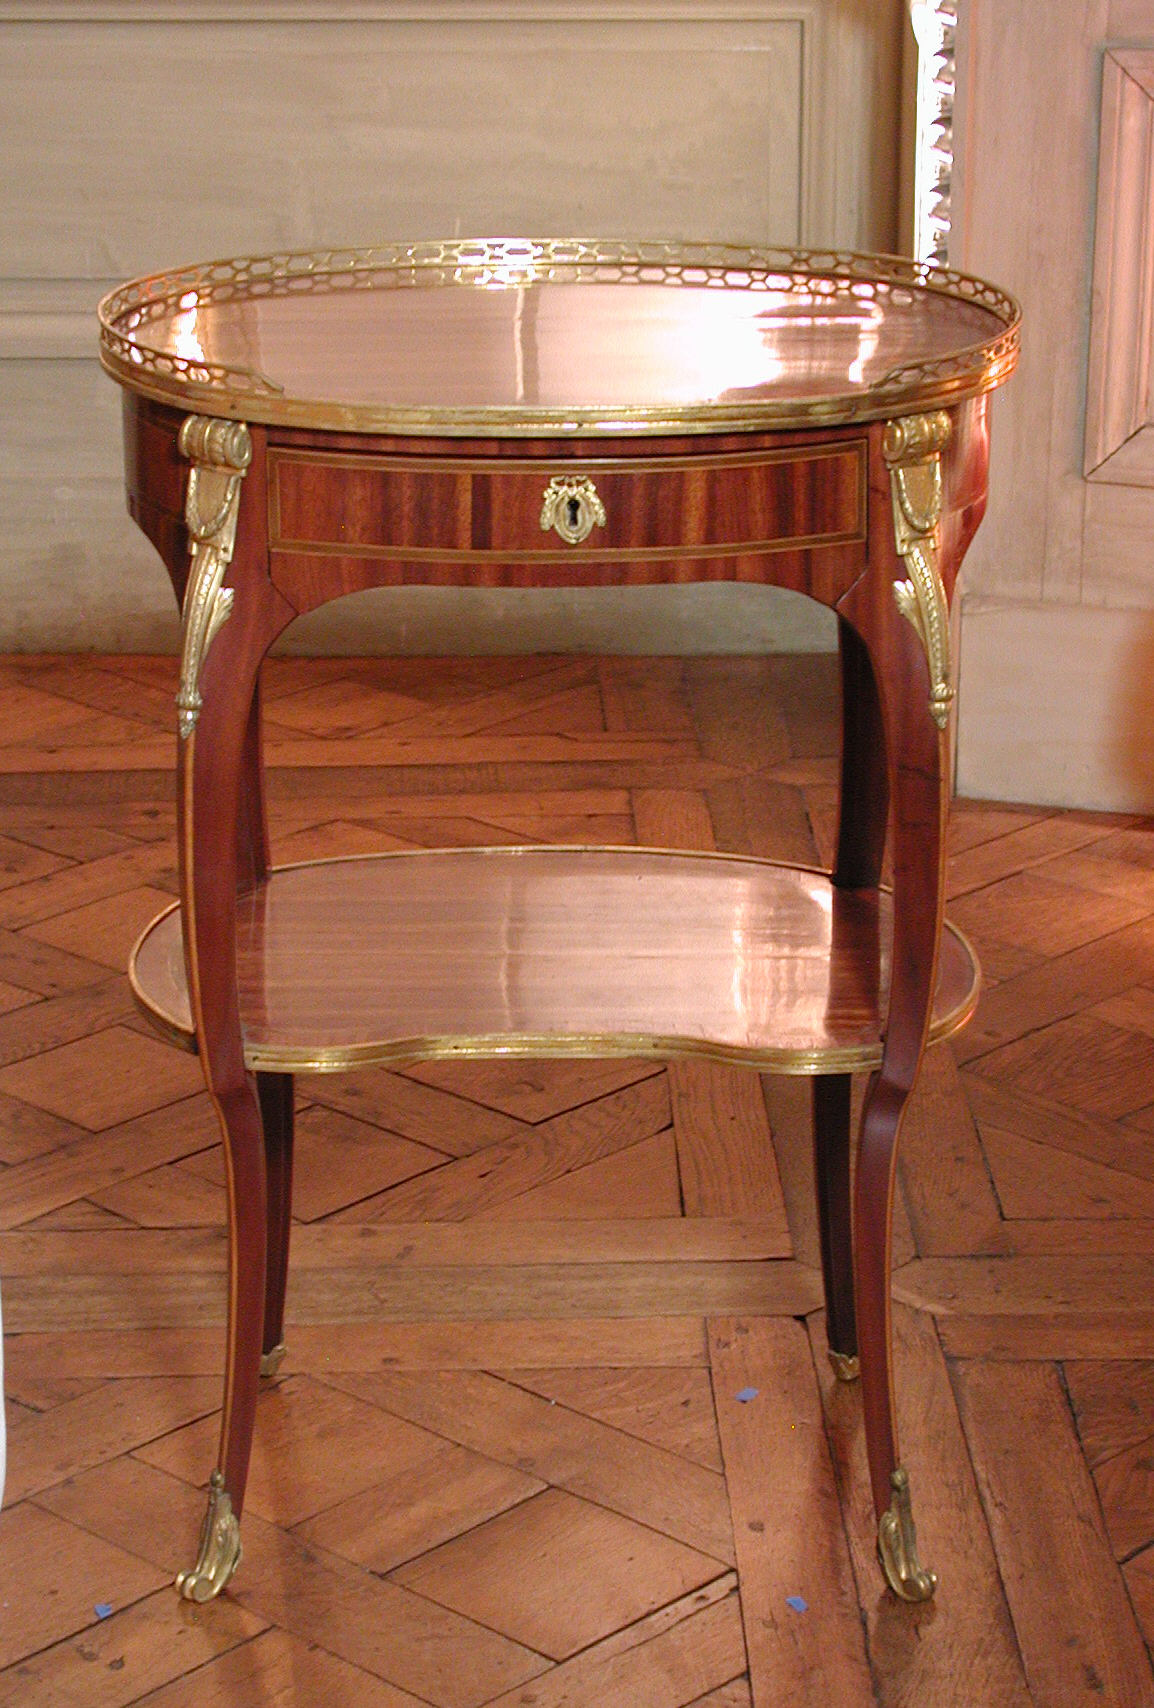 Paris Museum pair) Vandercruse, The oval Lacroix table Roger French, of (one Metropolitan called of | Art | writing Small | a